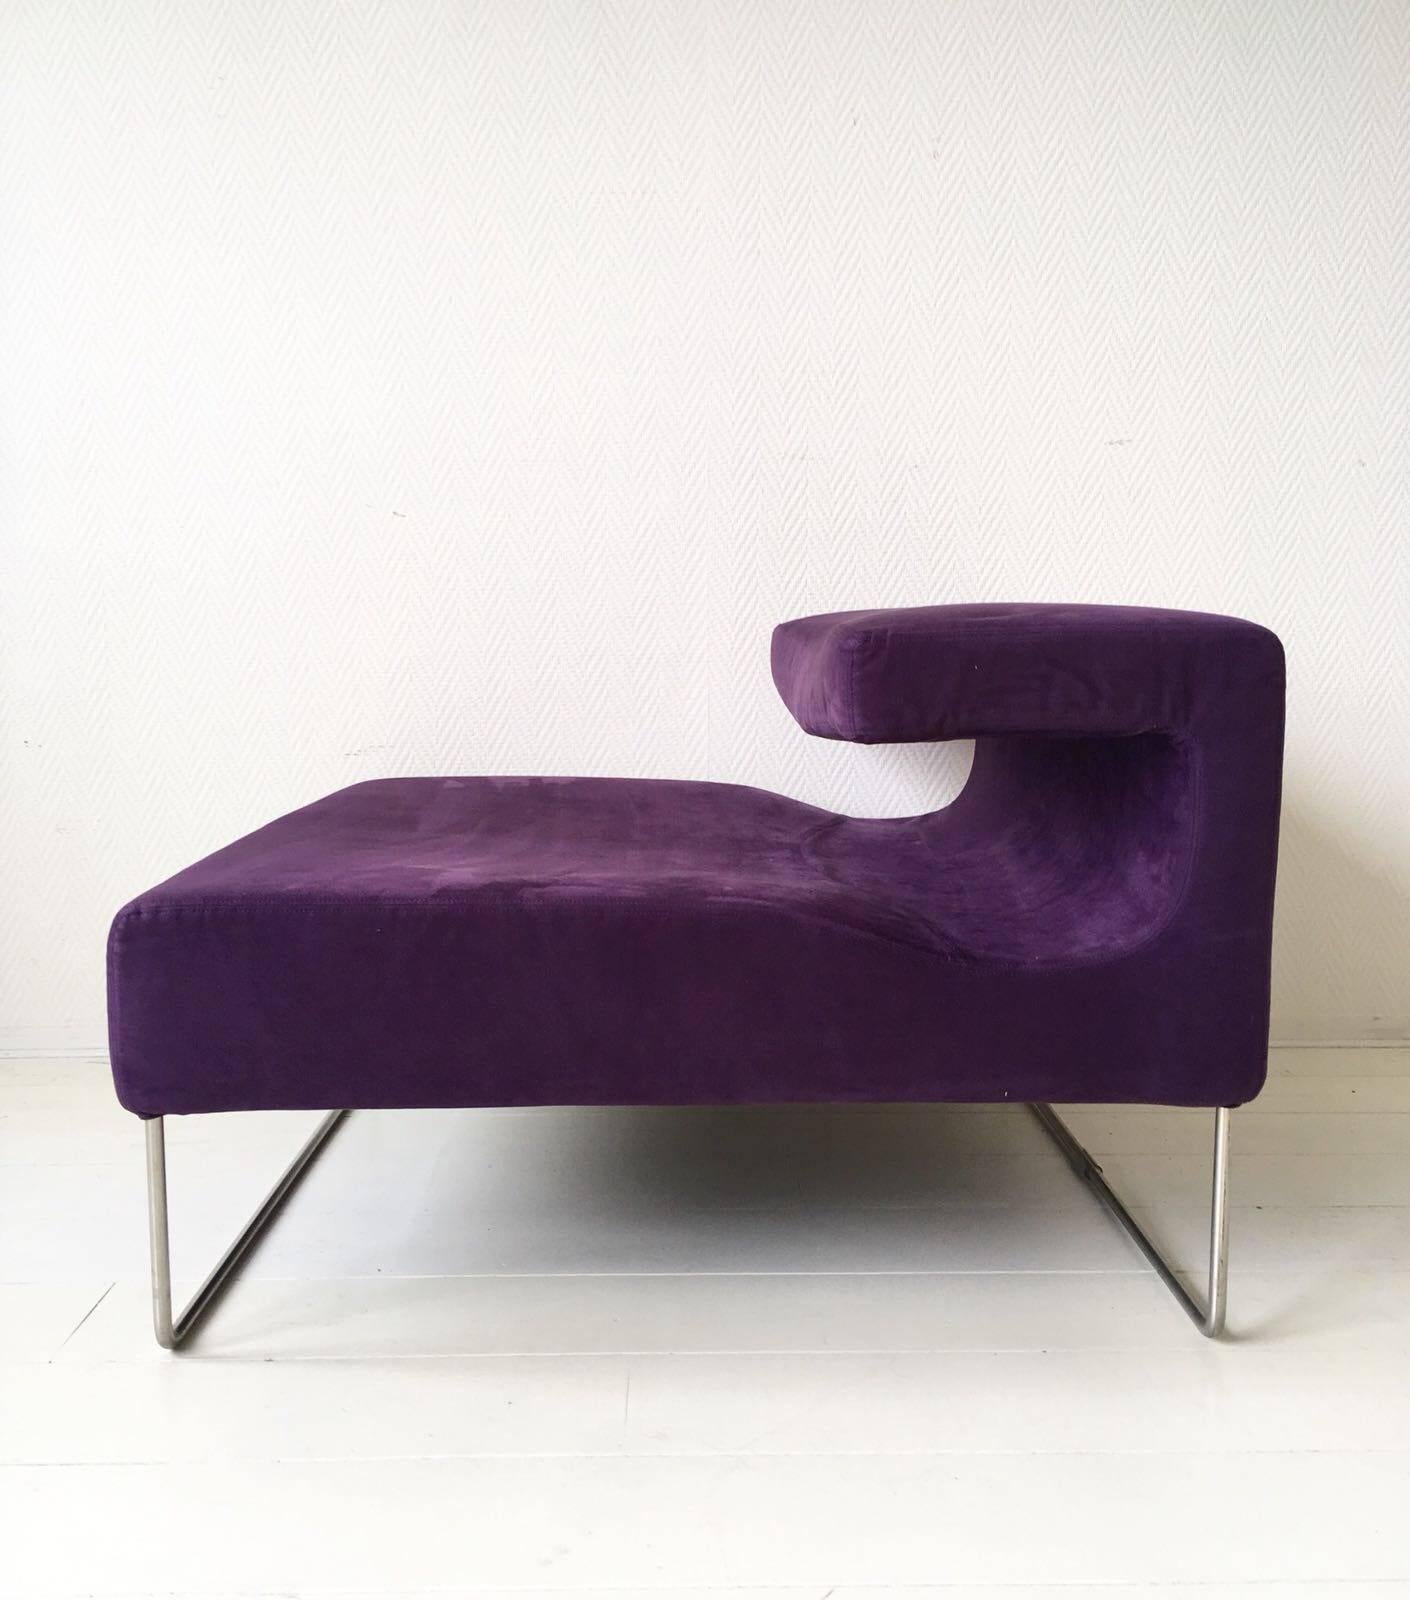 These two futuristic and Minimalist chairs form together a sofa; one in pink/purple (corner model) and the other purple/purple. The two colors are in perfect harmony when placed together but when placed separately in a room, they show a matching